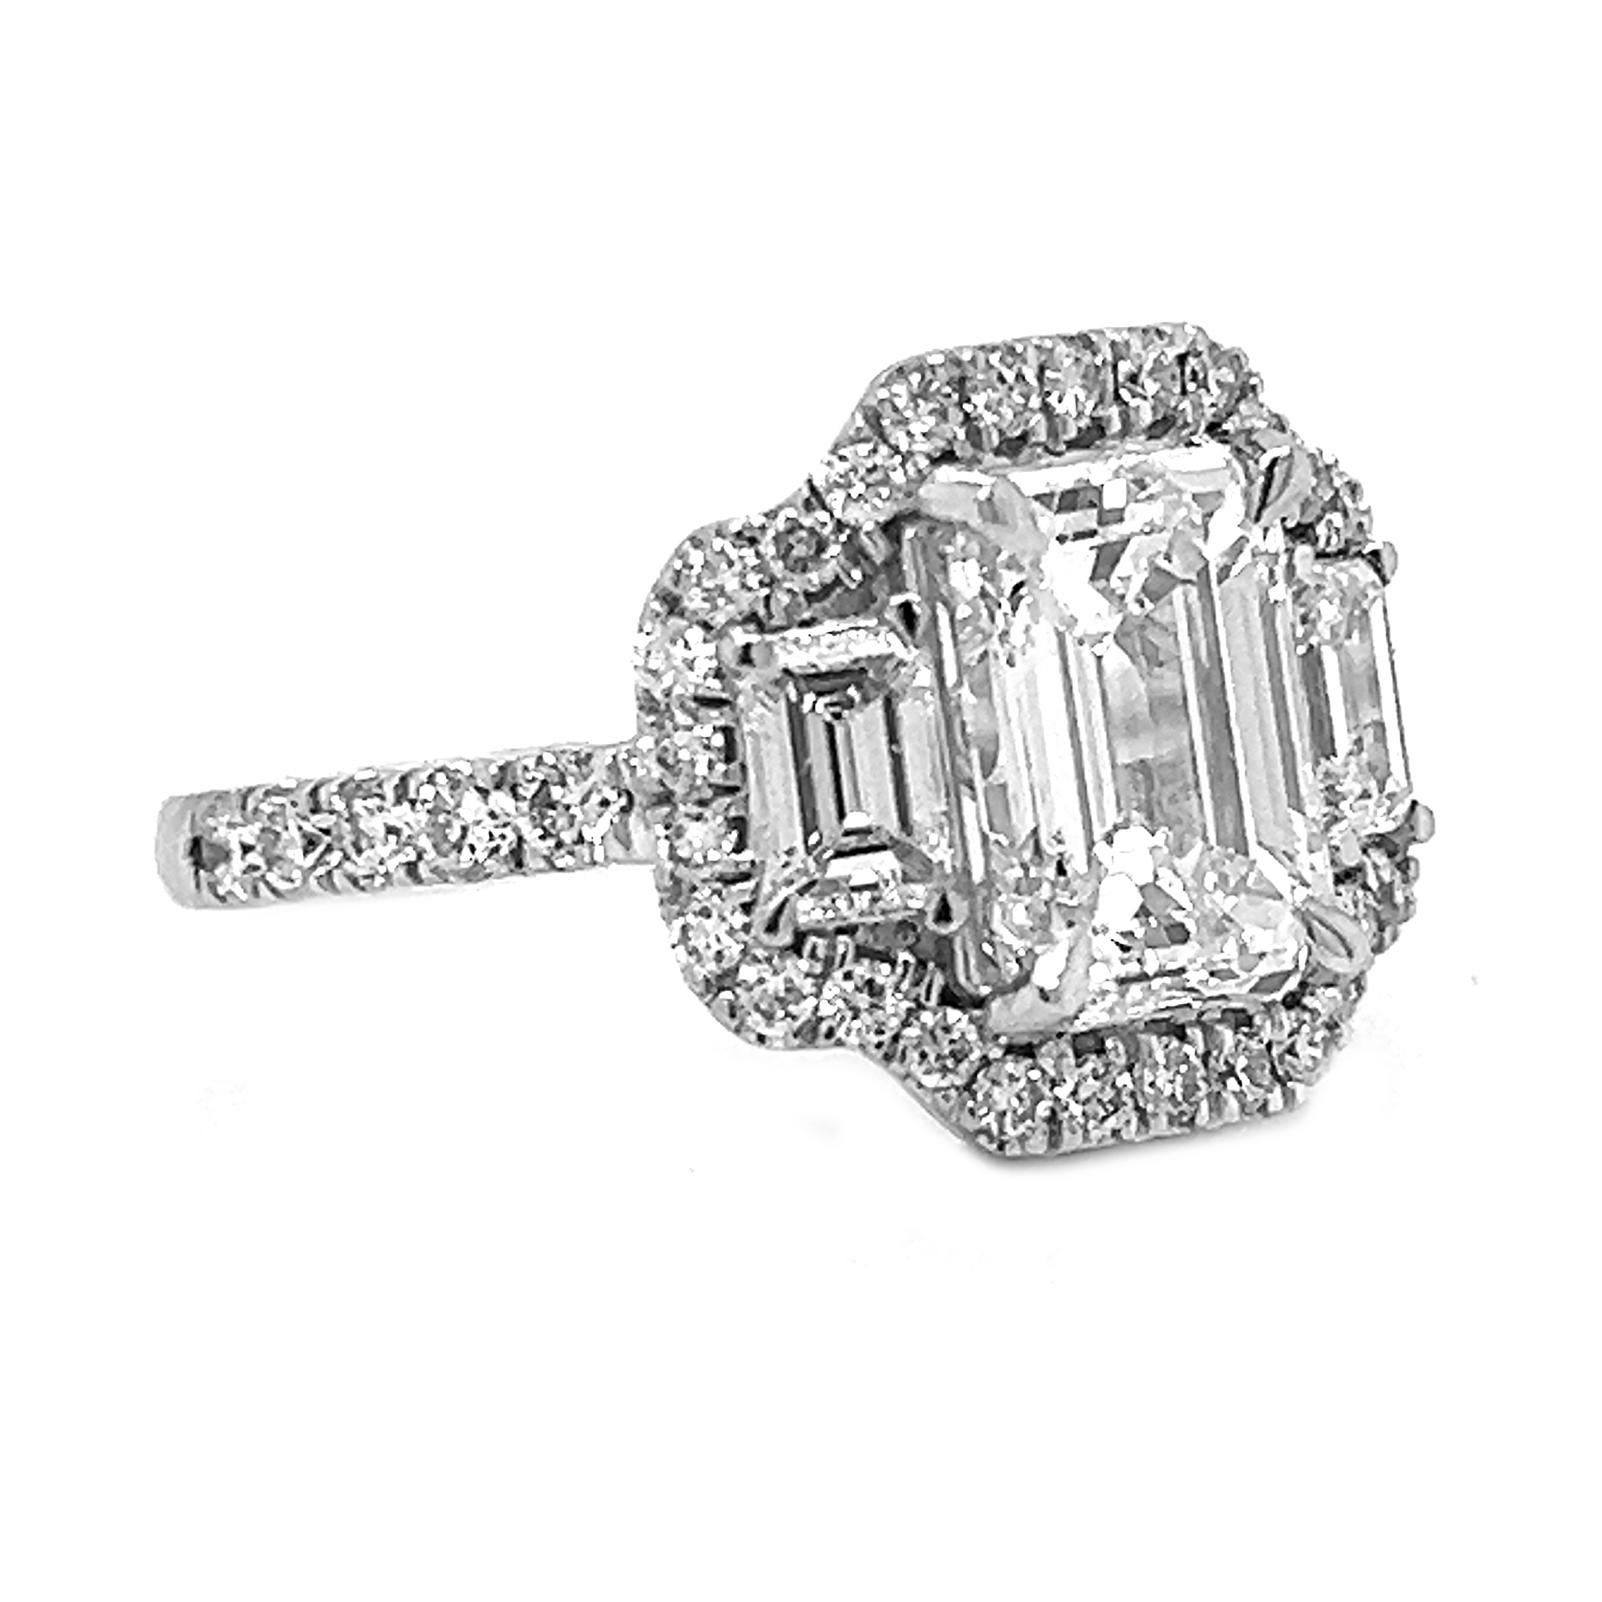 Elegant 3.25 Carat Total Weight Natural Mined 3 Stone Art Deco GIA Certified Diamond Ring - 14KT Gold

Description:
Elevate your elegance with our Elegant 3.25 Carat Total Weight Natural Mined 3 Stone Art Deco GIA Certified Diamond Ring,